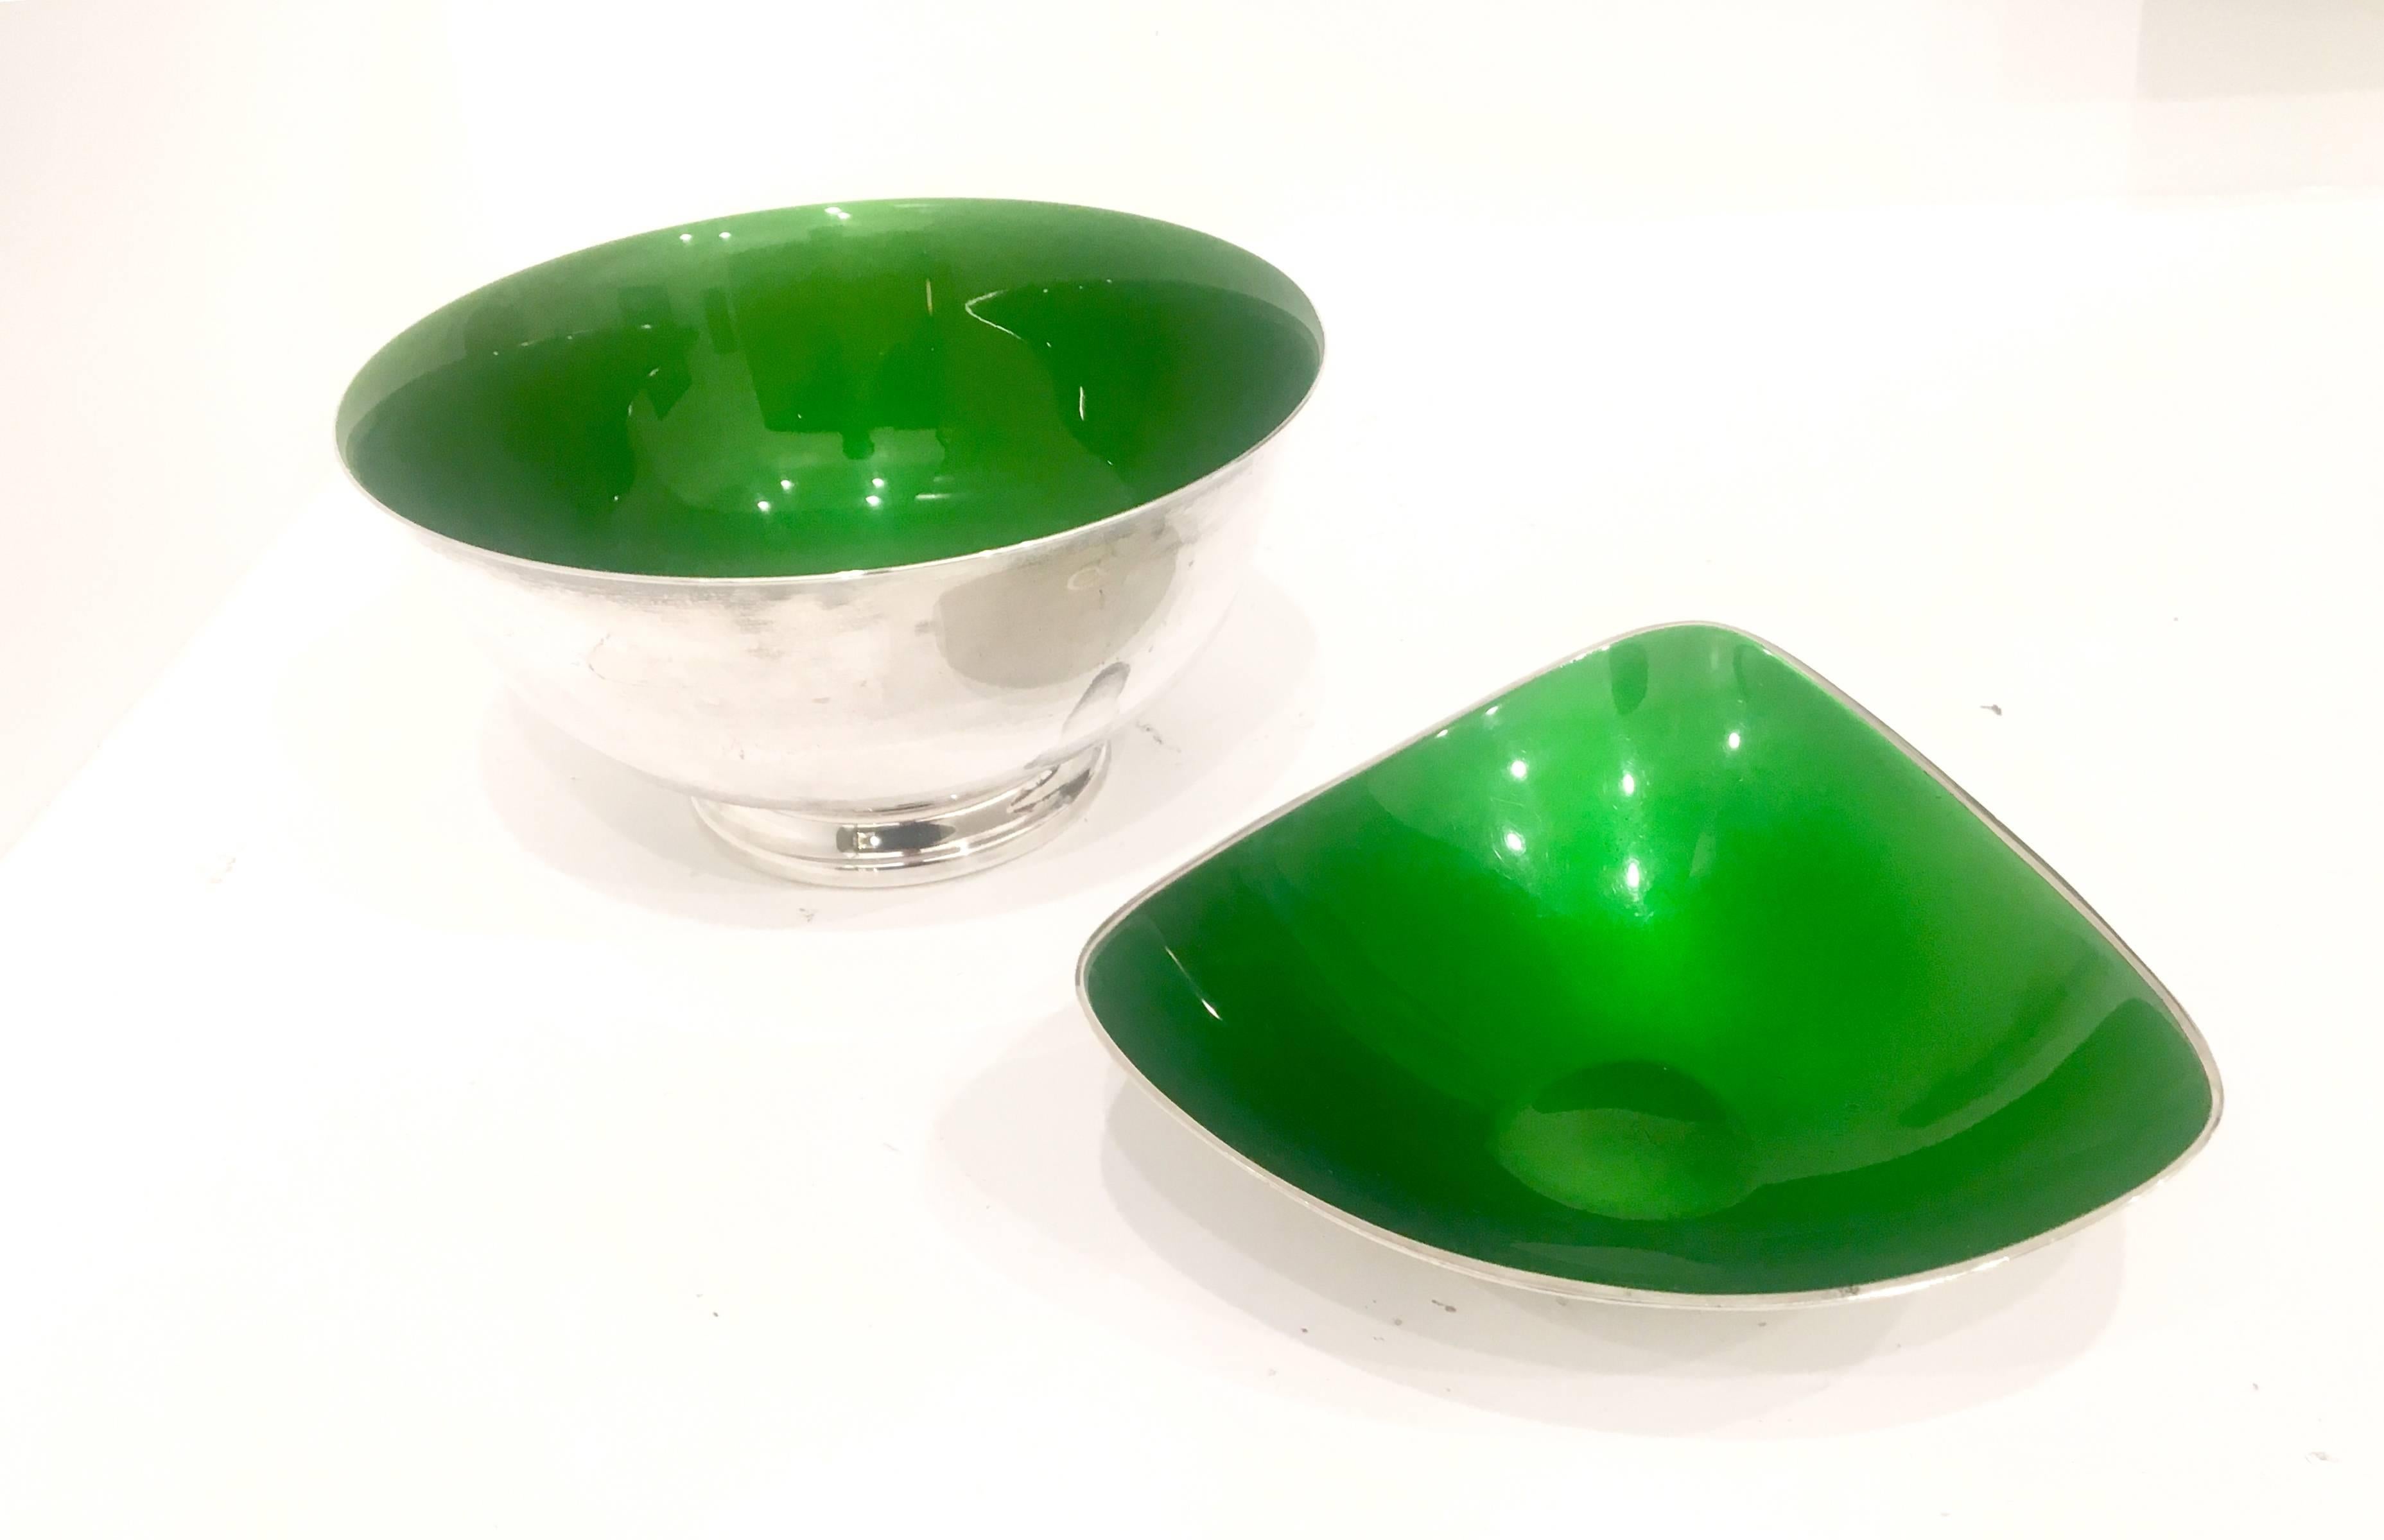 Beautiful design on these pair of Reed & Barton green enameled bowls the large footed bowl its 8" in diameter and 4" tall , the small one its 7 1/2" in diameter and 2 1/2" tall , both in nice condition and light wear.